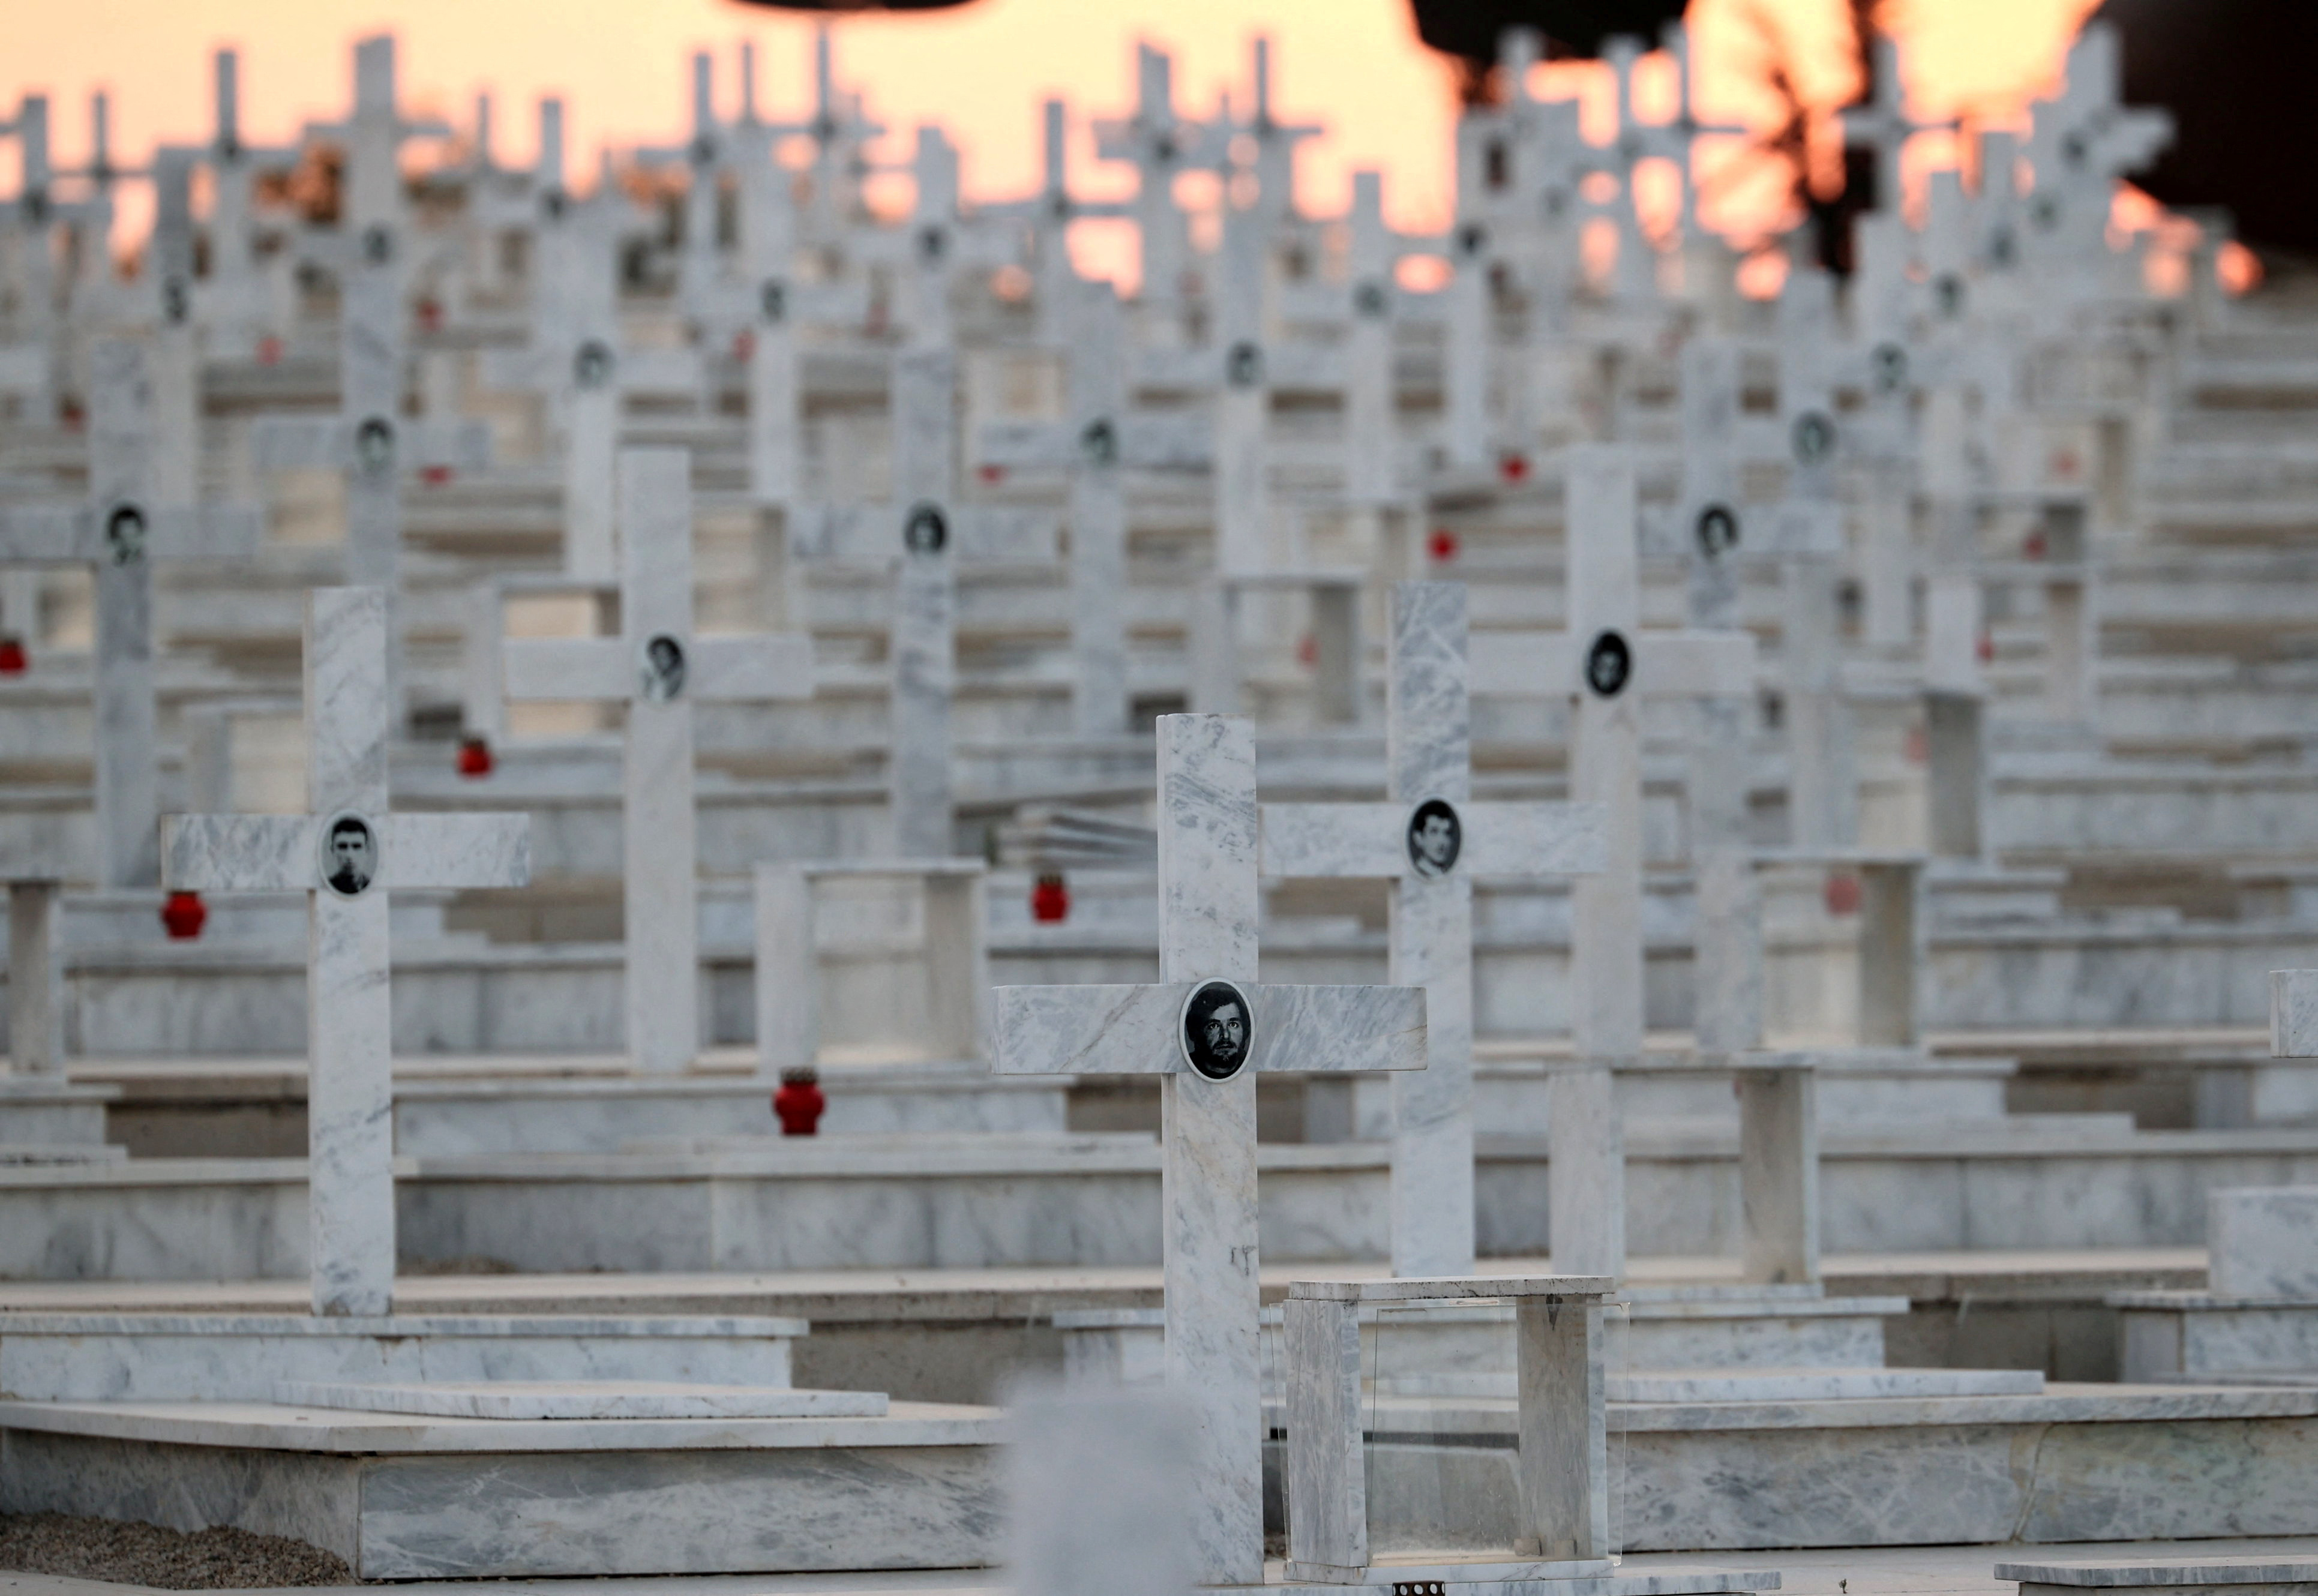 Pictures of soldiers killed in the 1974 Turkish invasion of Cyprus are seen on crosses at the Tymvos Makedonitissas military cemetery in Nicosia